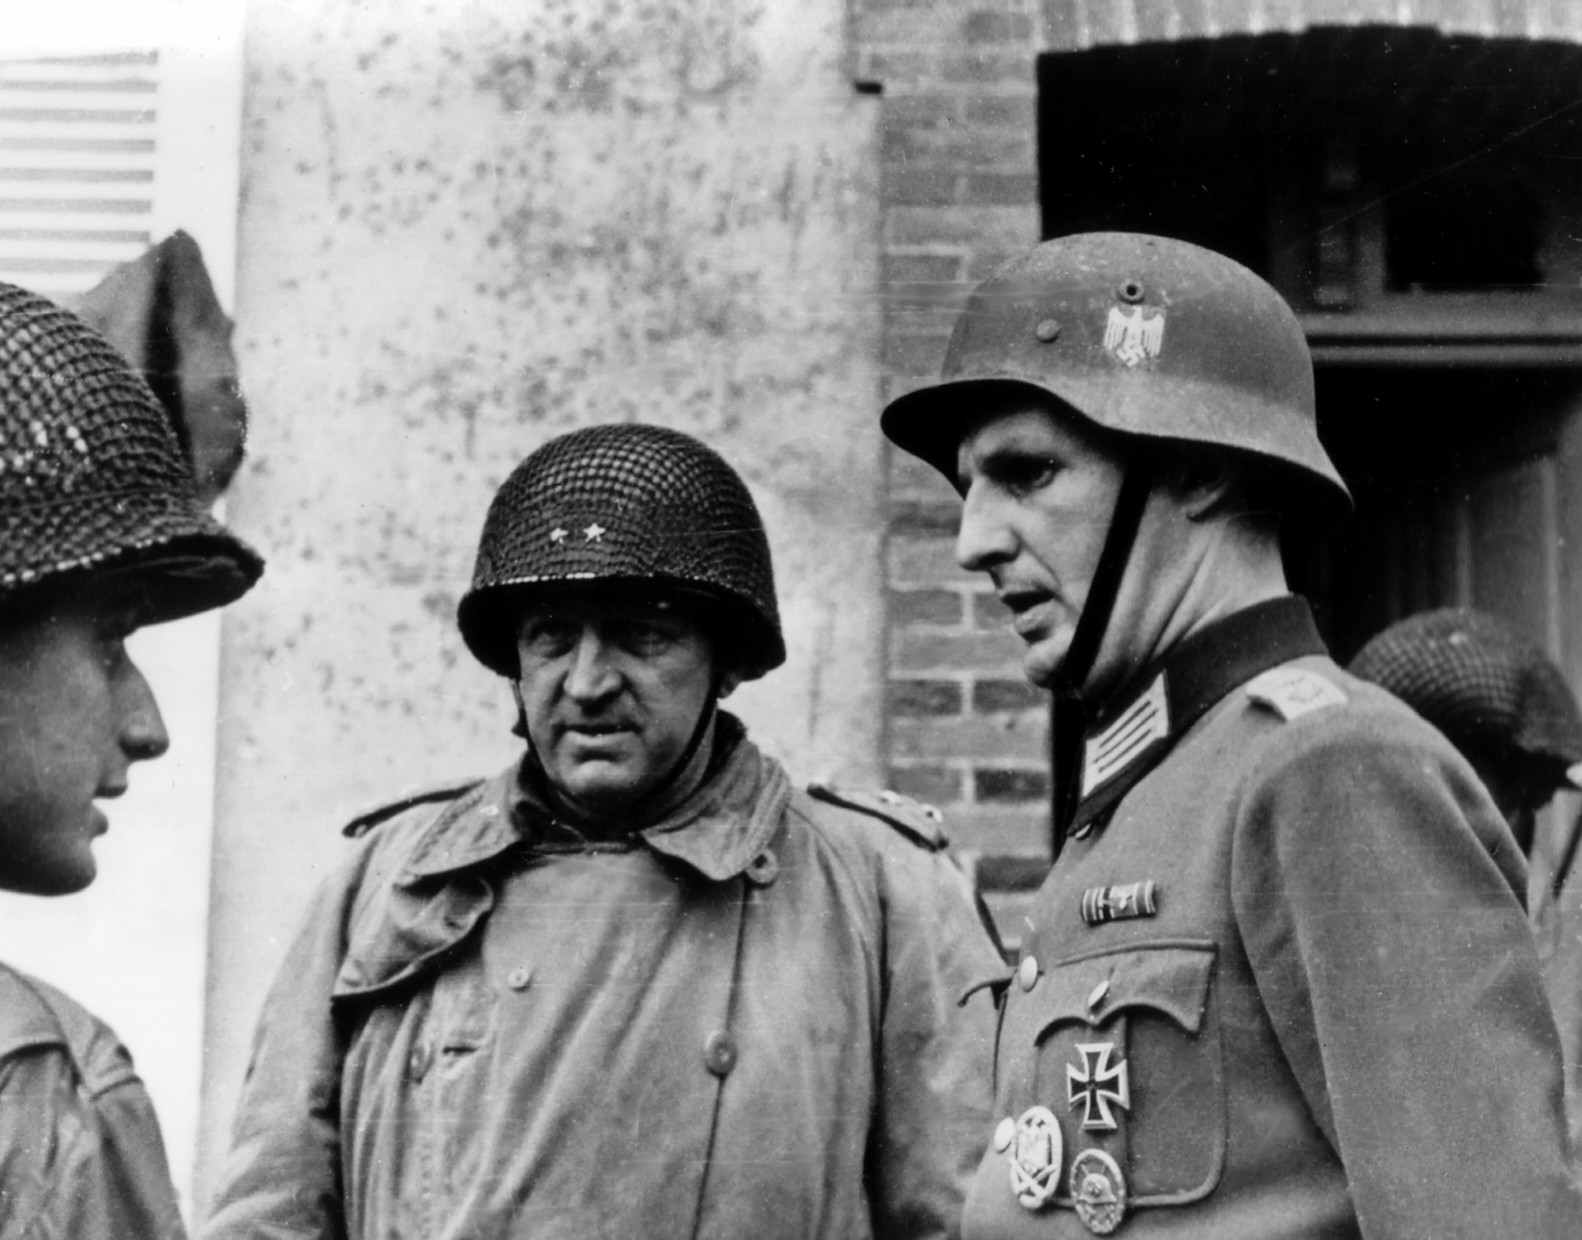 Major General Manton Eddy and another American officer speaking to a captured German officer, Cherbourg, France, 26-27 Jun 1944